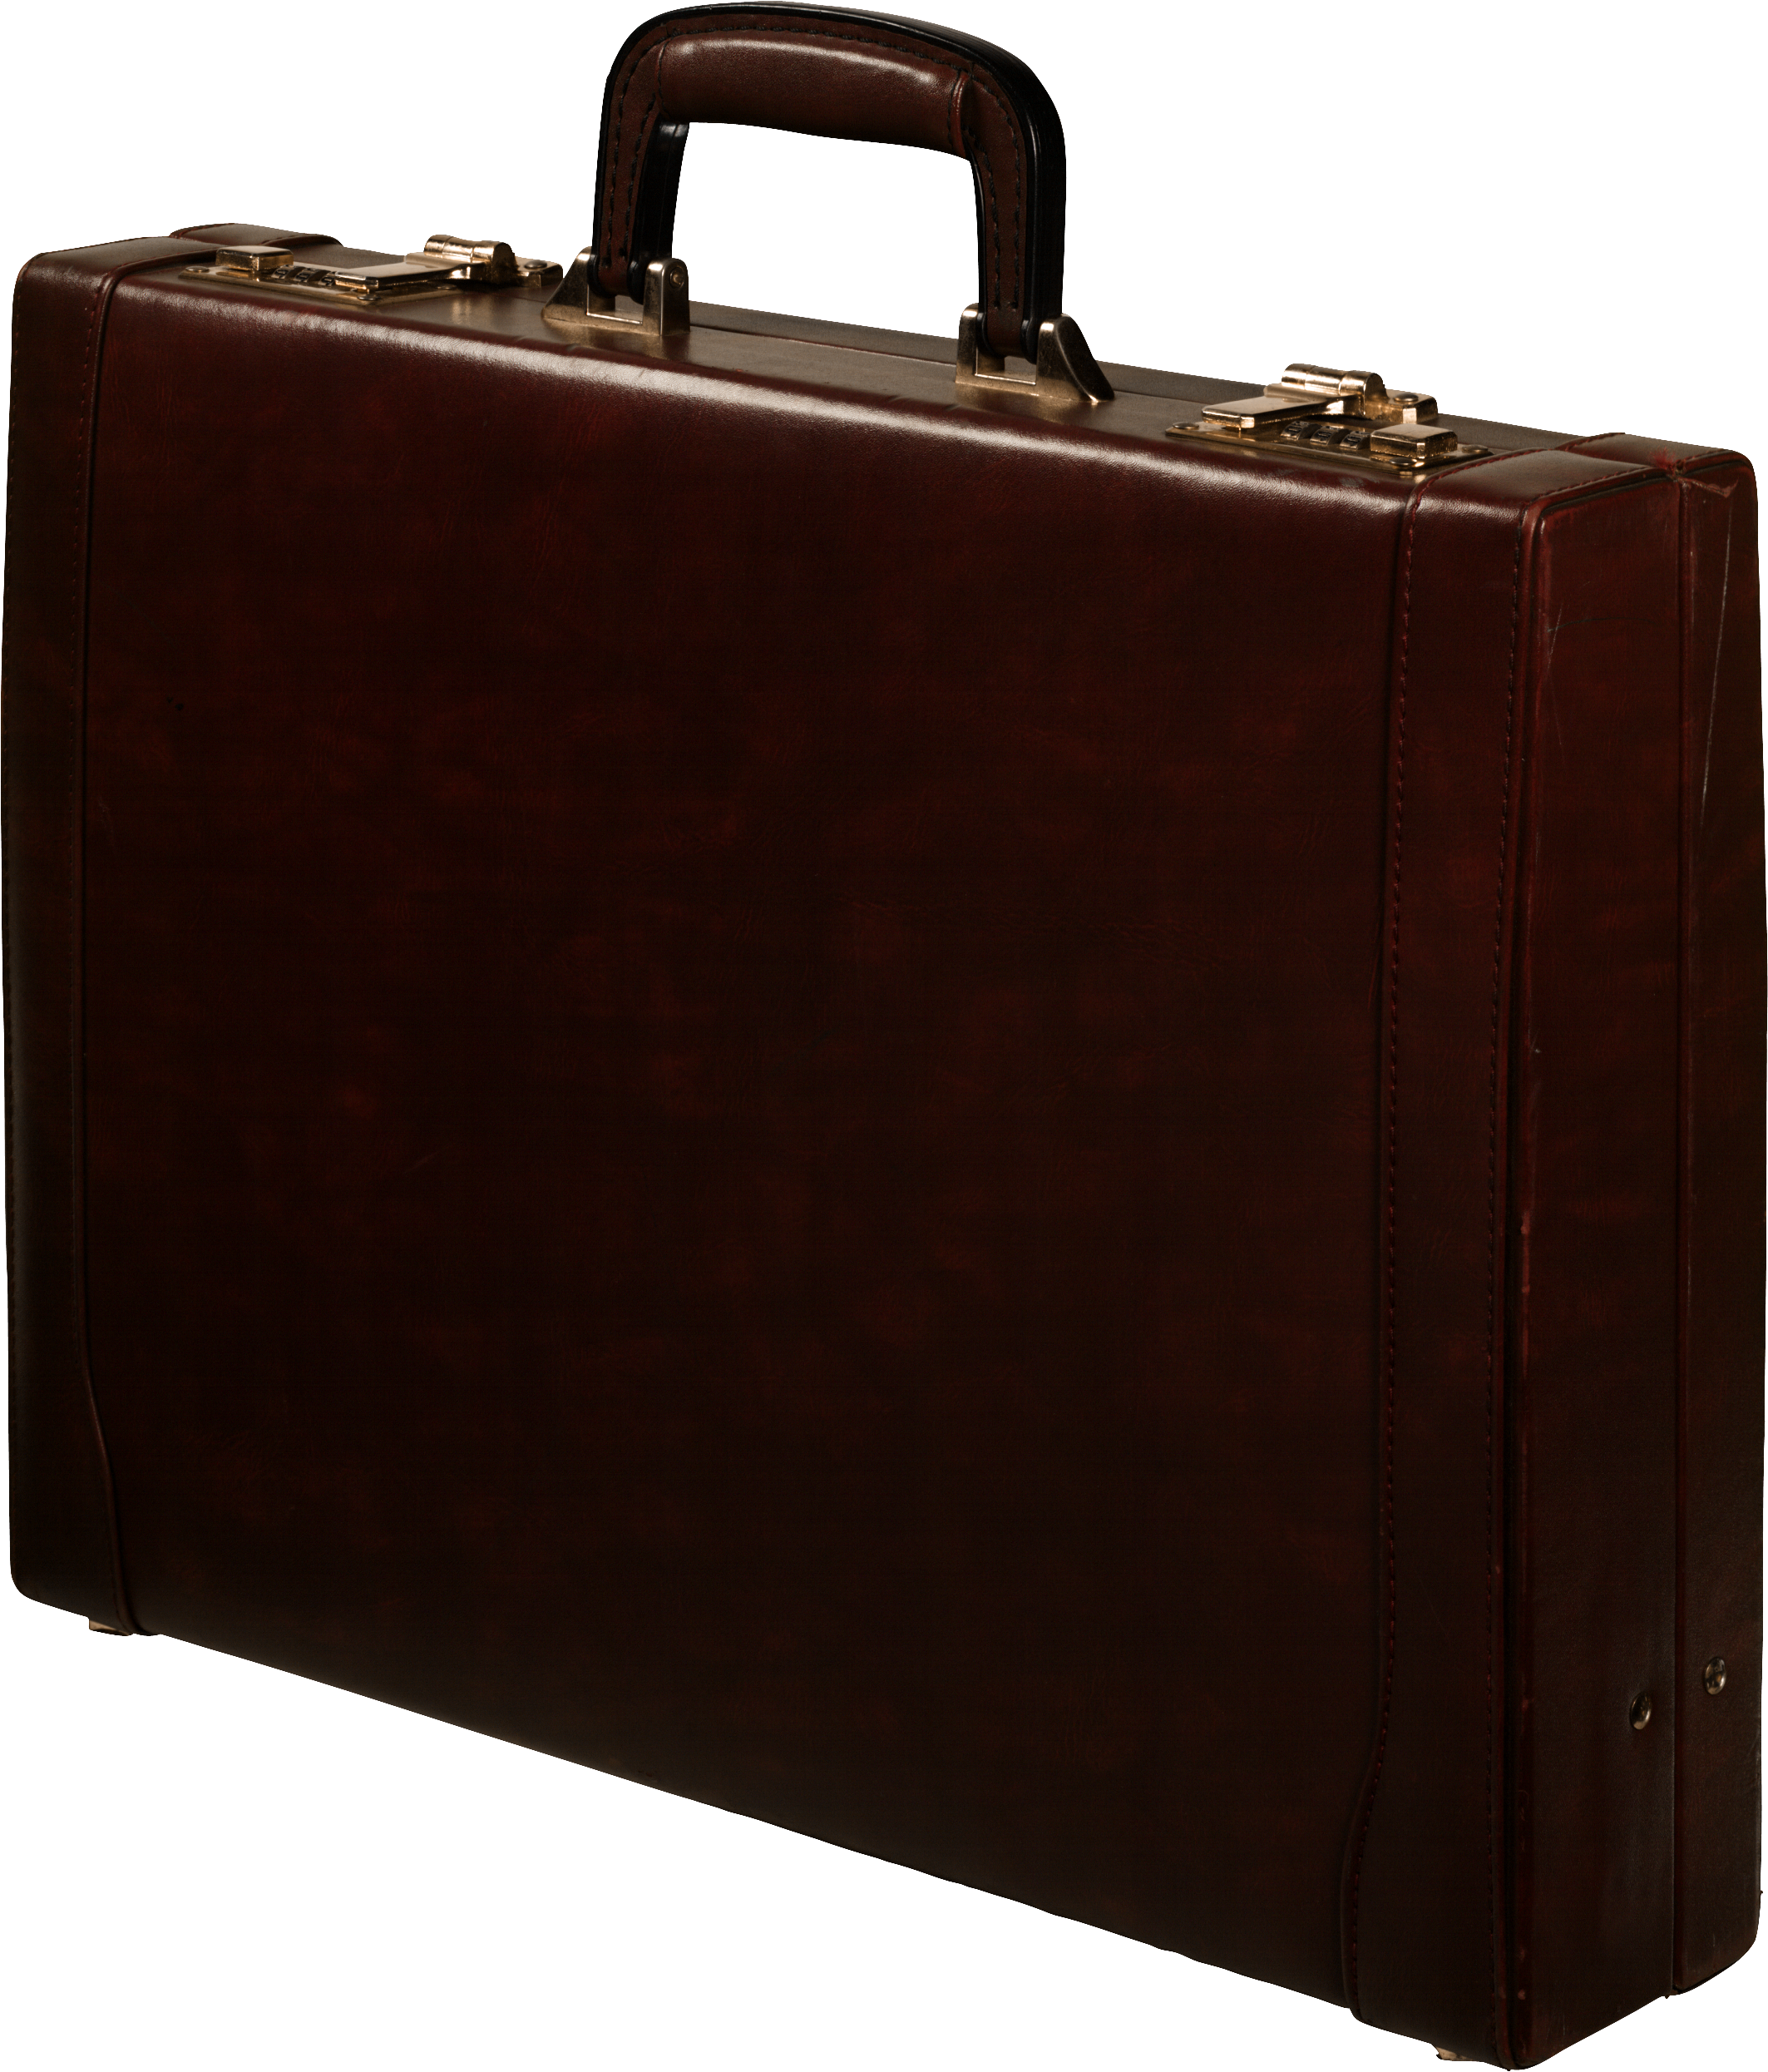 Suitcase HD PNG - 96563